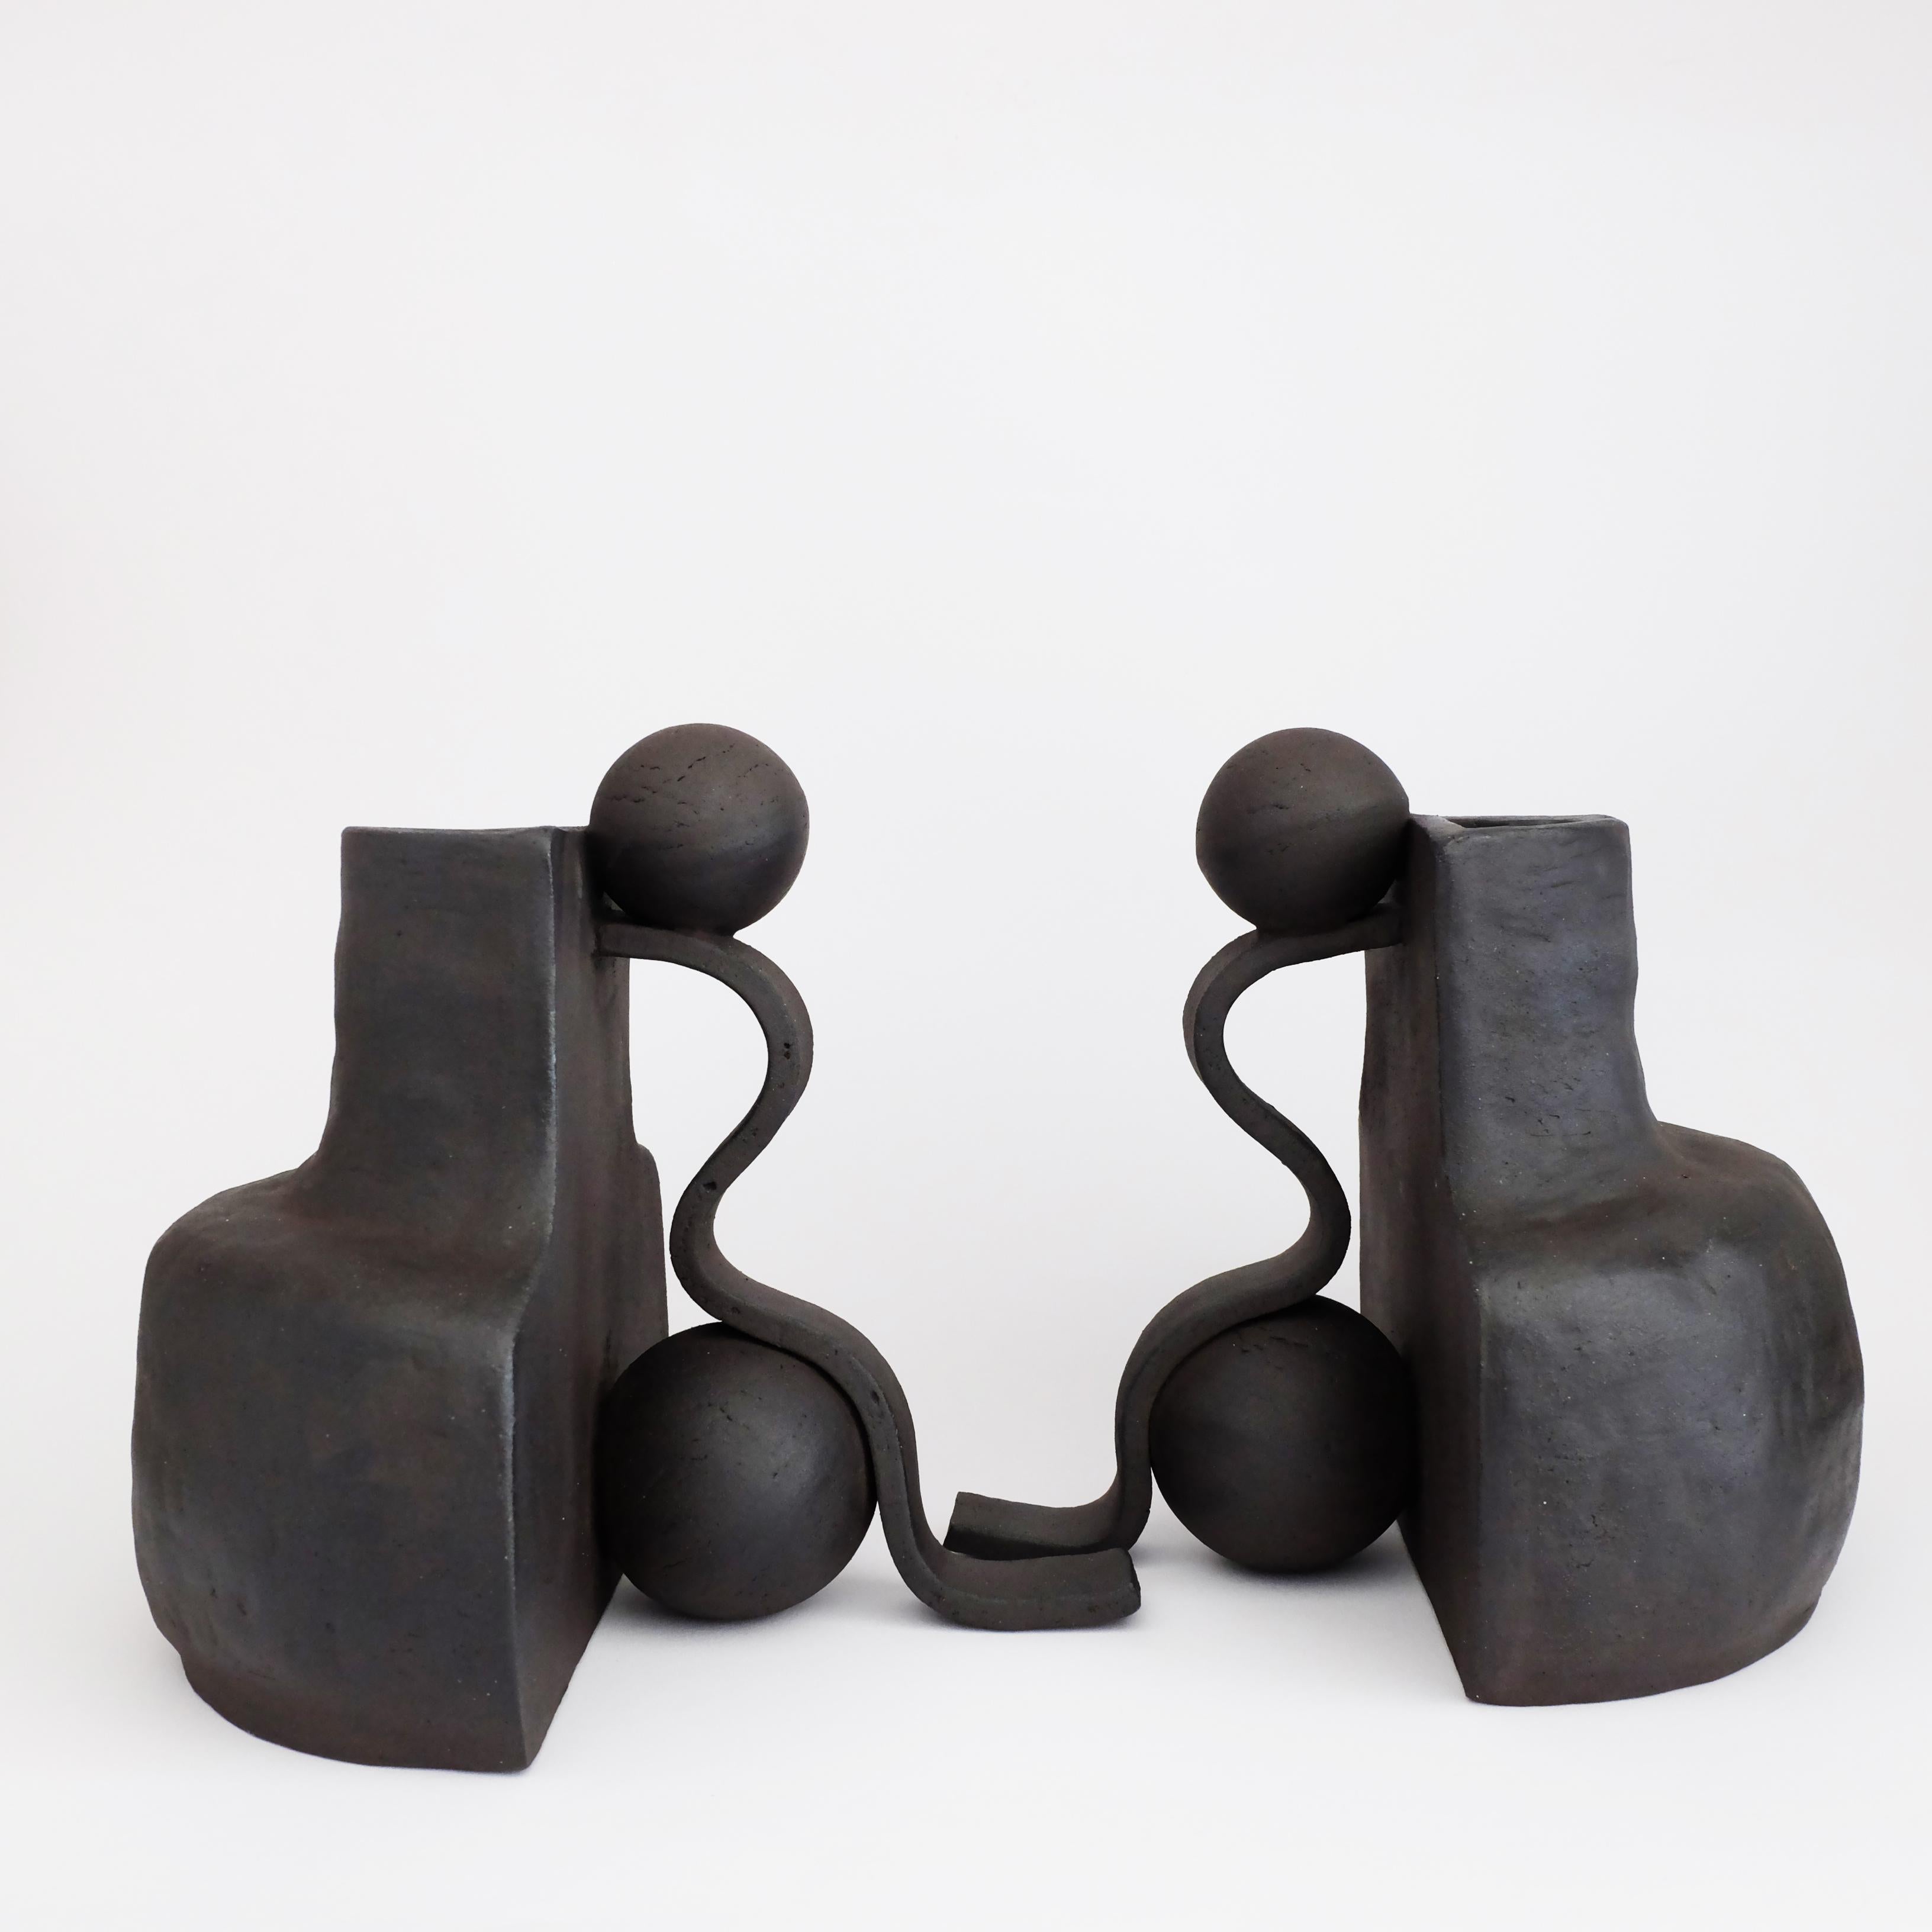 Set Of 2 Sculptural Fragment 02 Vases by Ia Kutateladze
One oOf A Kind.
Dimensions: W 21 x H 21 cm.
Materials: Raw black clay.

Fragment 02 vase is a sculptural, functional object hand-built from black clay. The contrasting sides- organic shape on